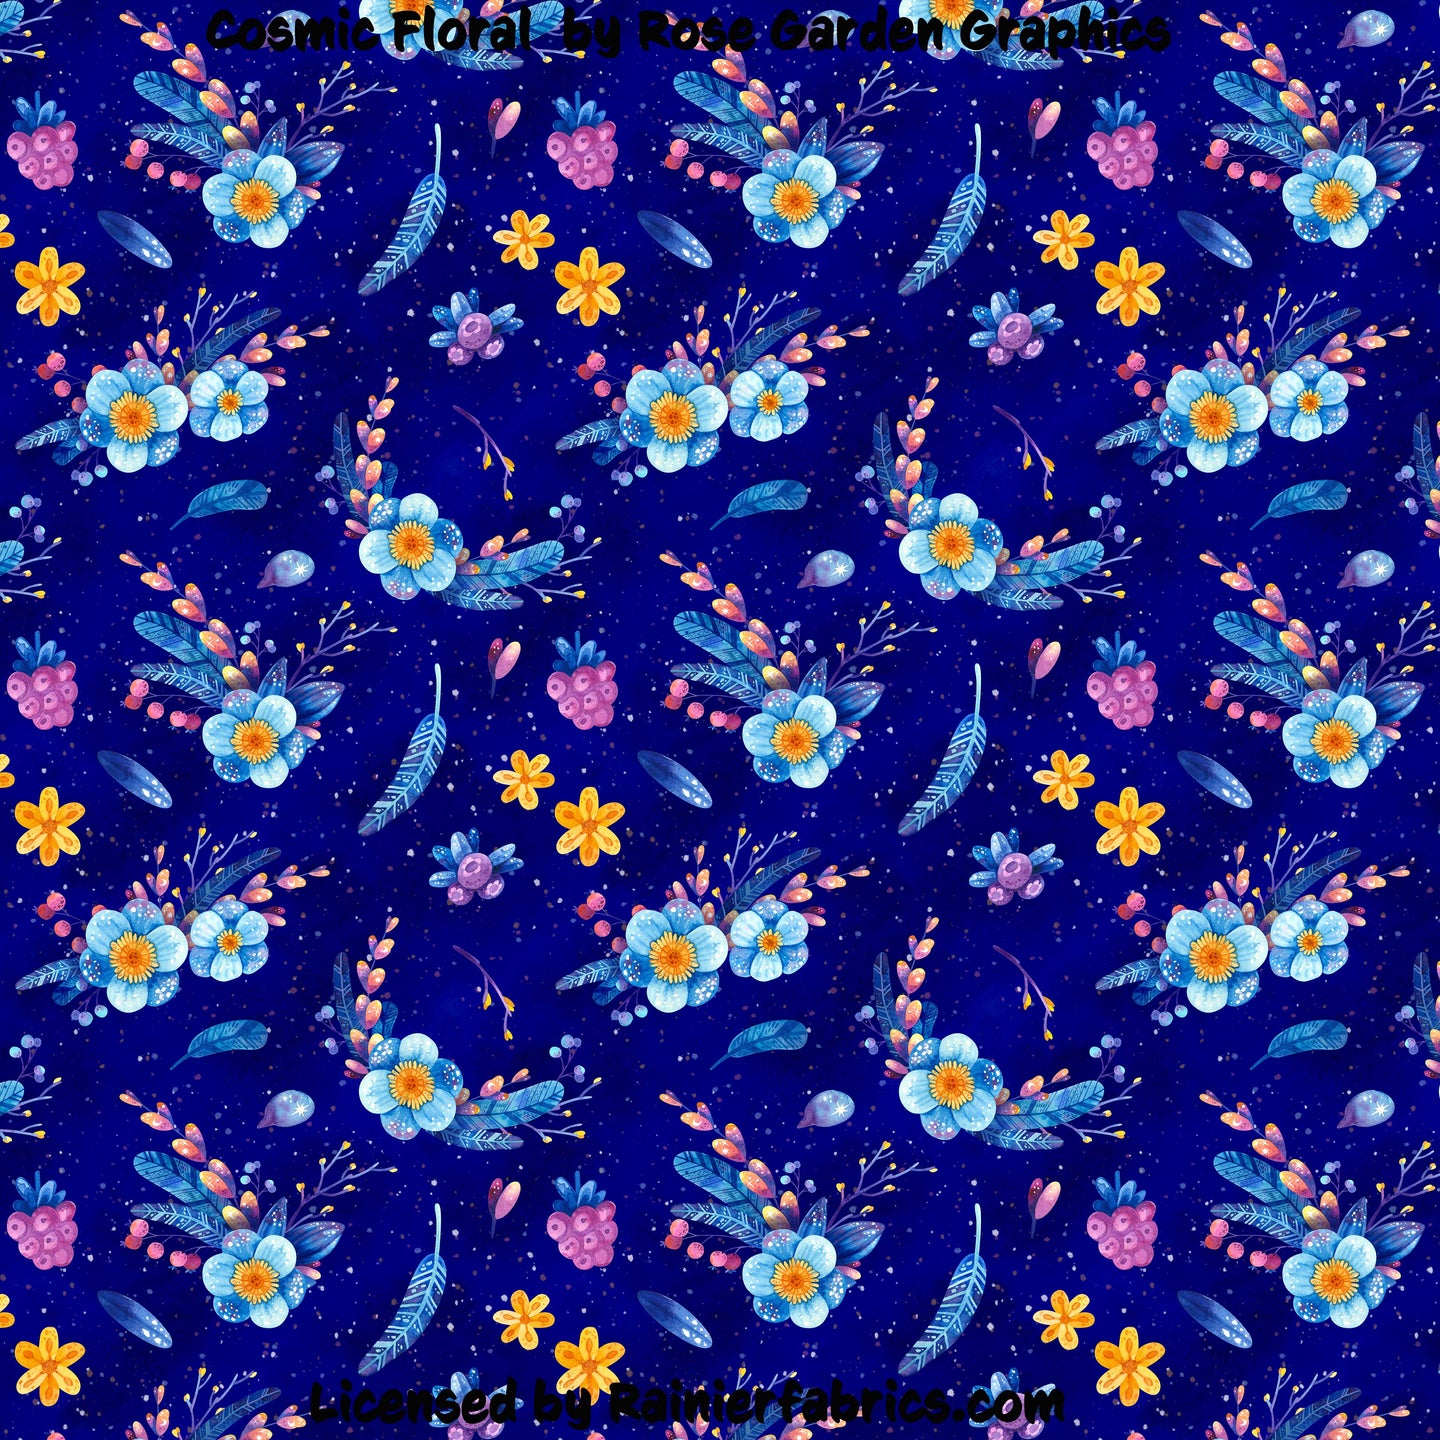 Cosmic Floral by Rose Garden Graphics - 2-5 day turnaround - Order by 1/2 yard; Description of bases below